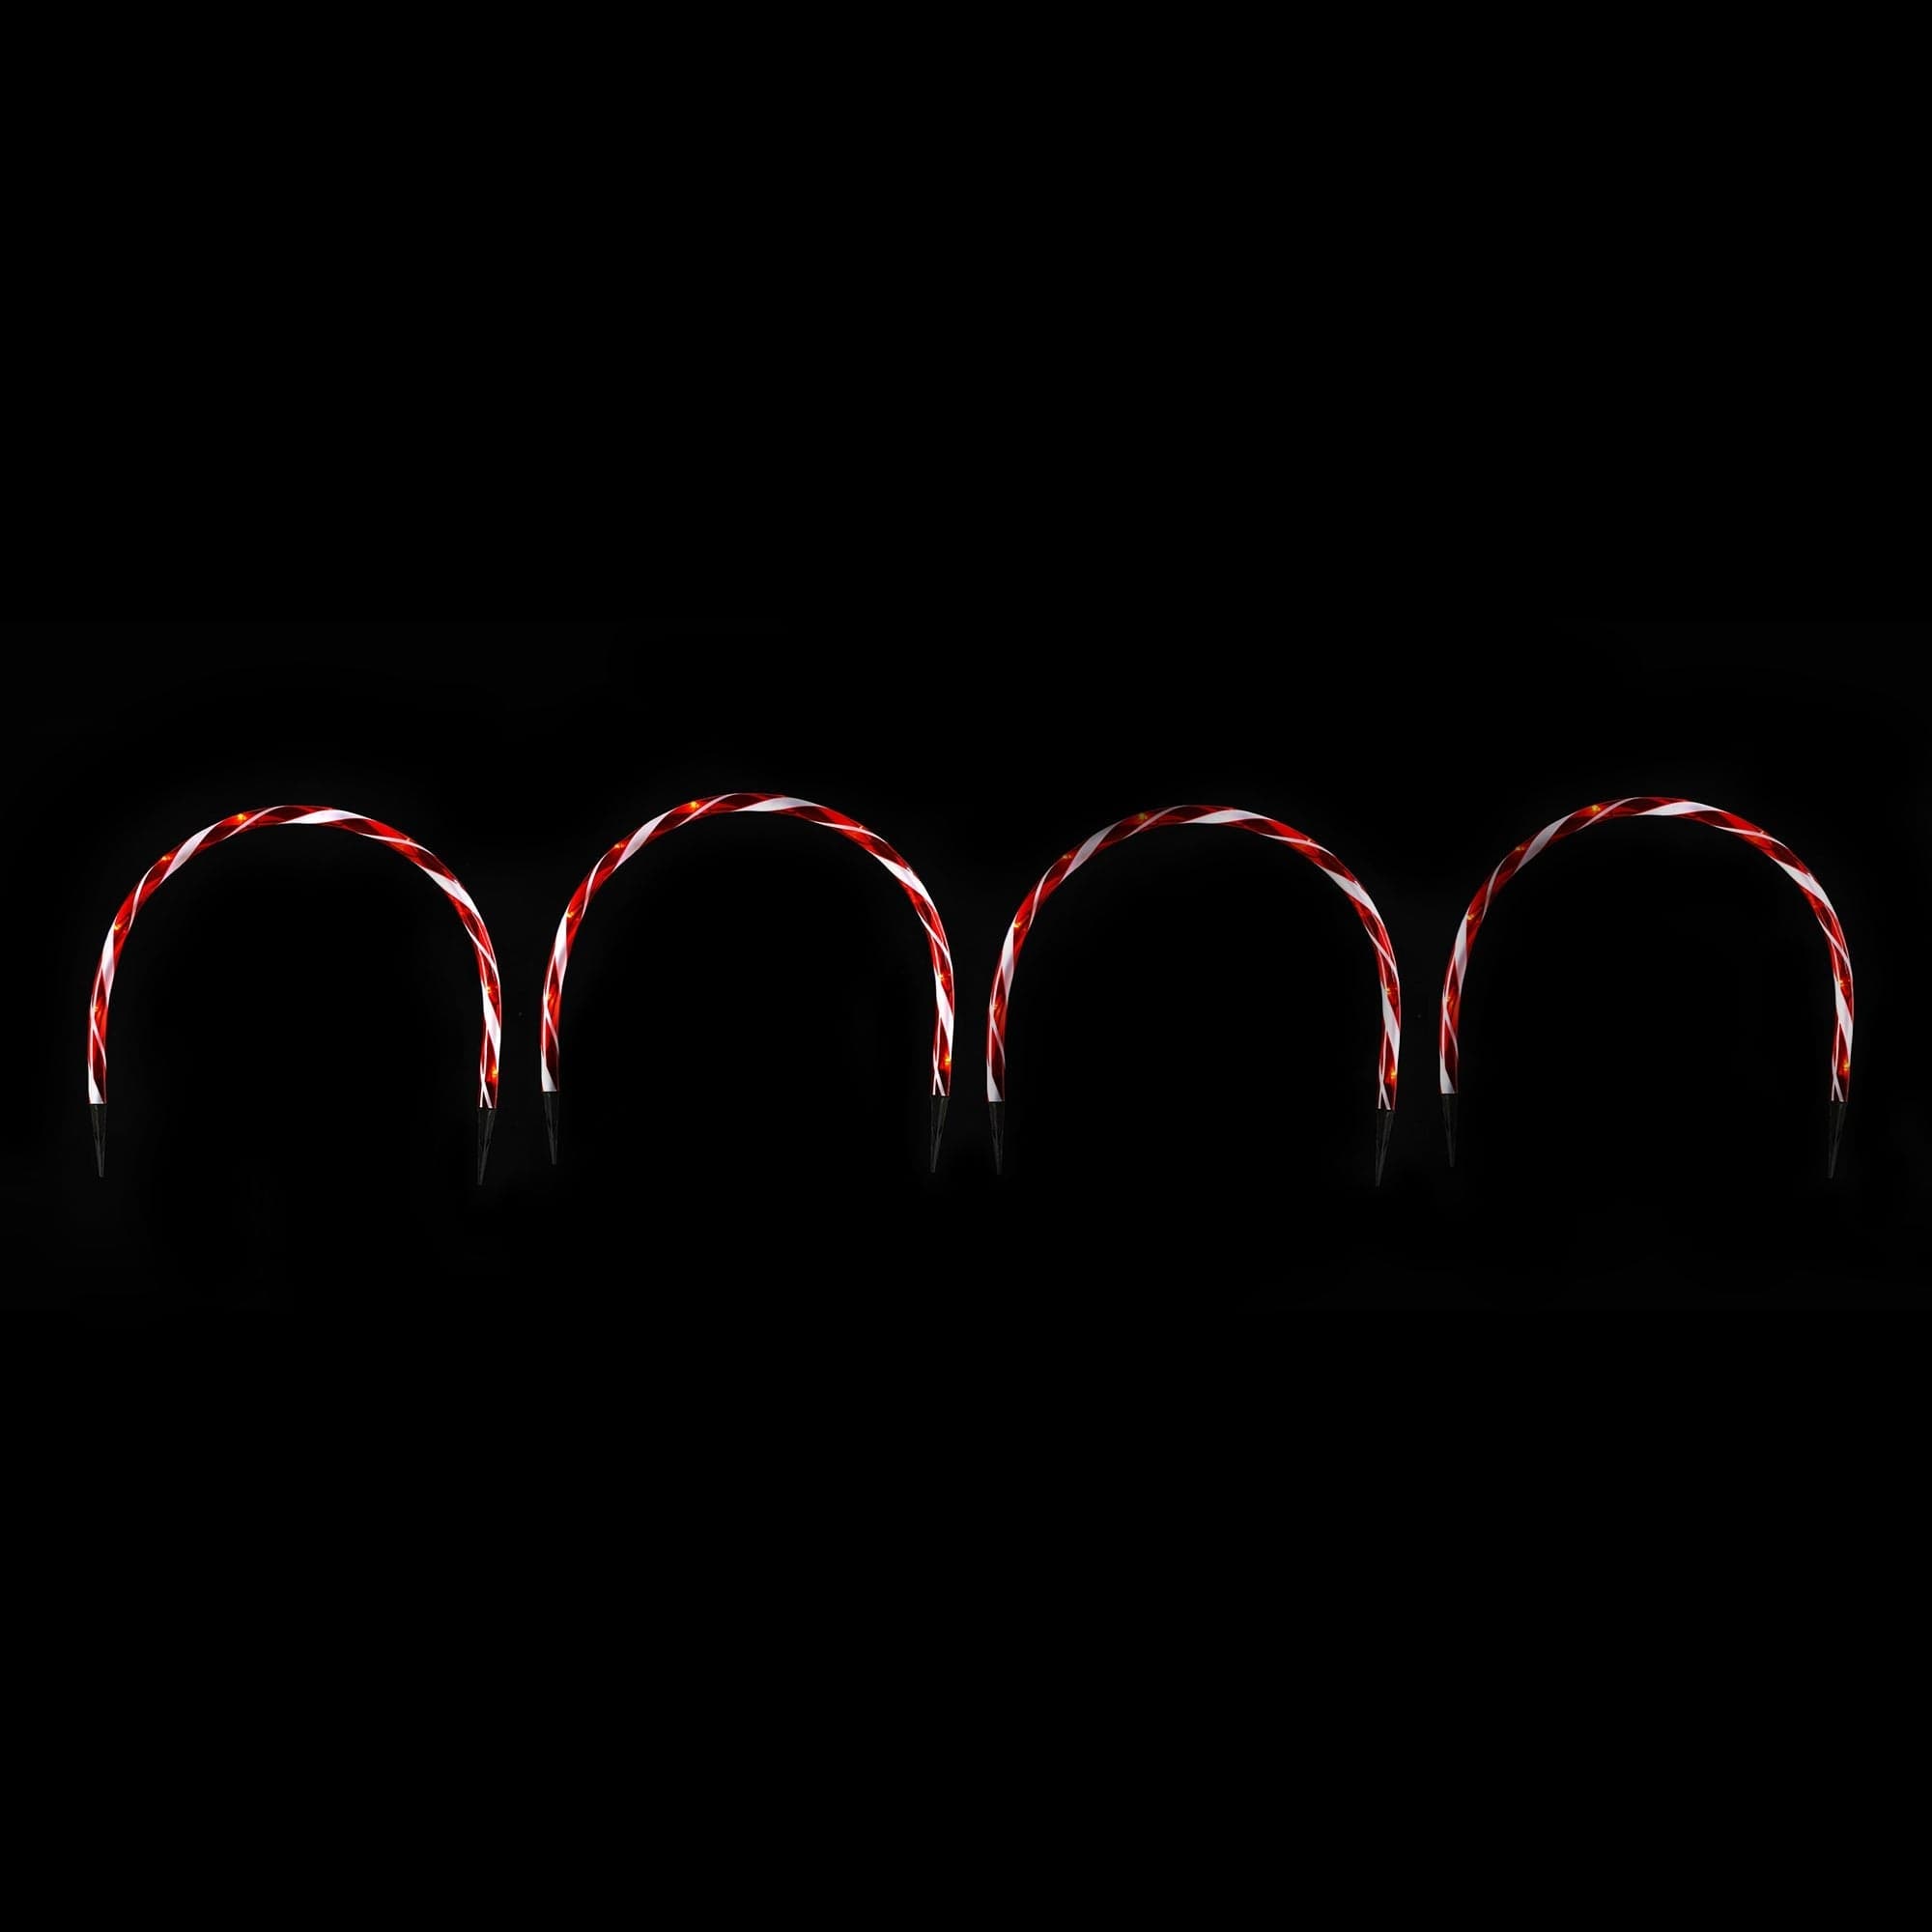 Lexi Lighting Christmas Path Light Set of 4 Arch Pathway Candy Cane Lights - 2 Colour Options